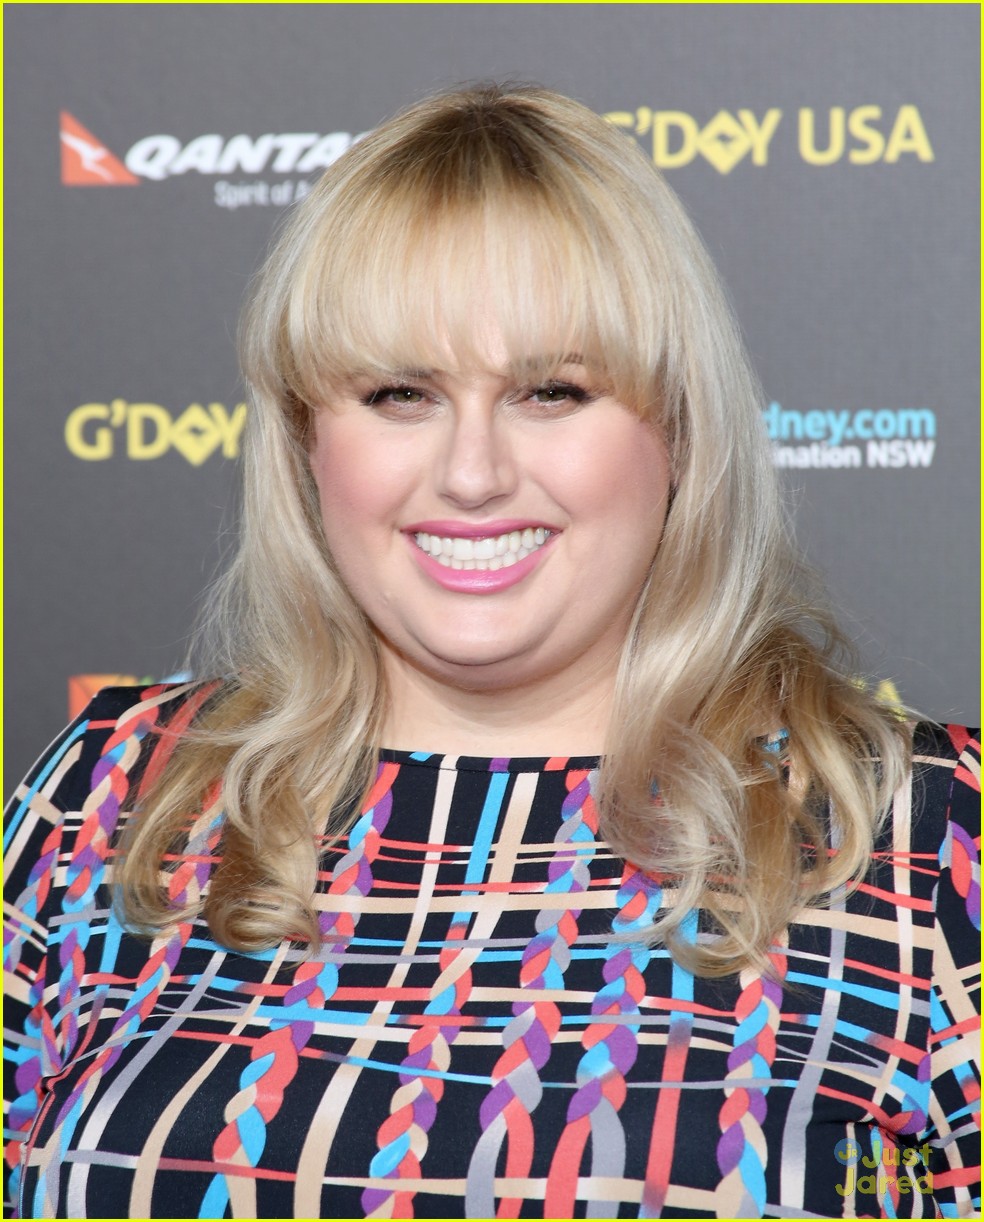 Rebel Wilson Brings the Laughs to the G'Day Gala! | Photo 769707 ...